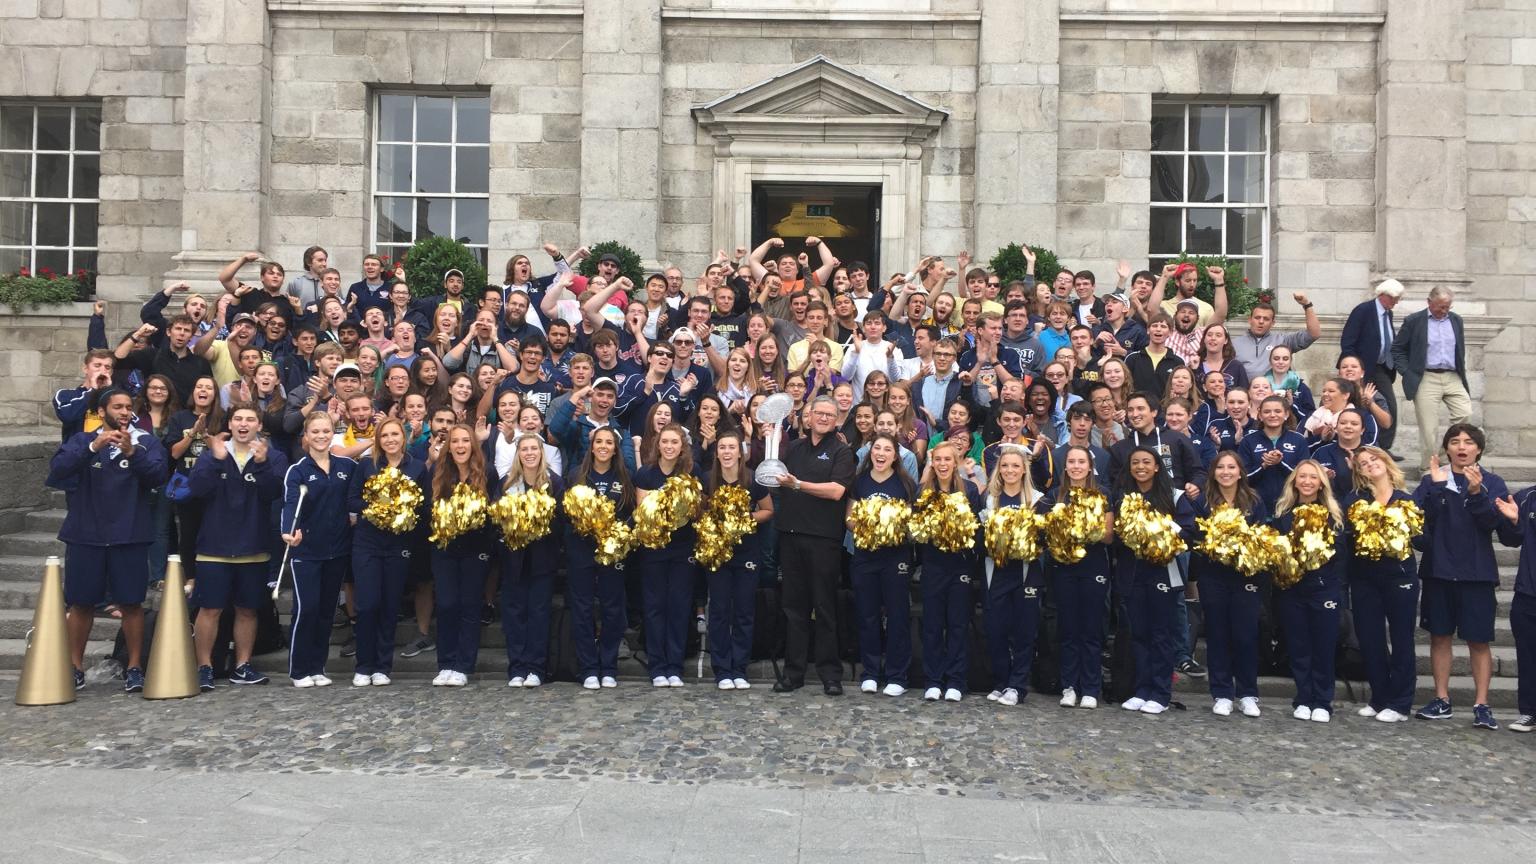 The Marching Band while on a trip to Ireland.